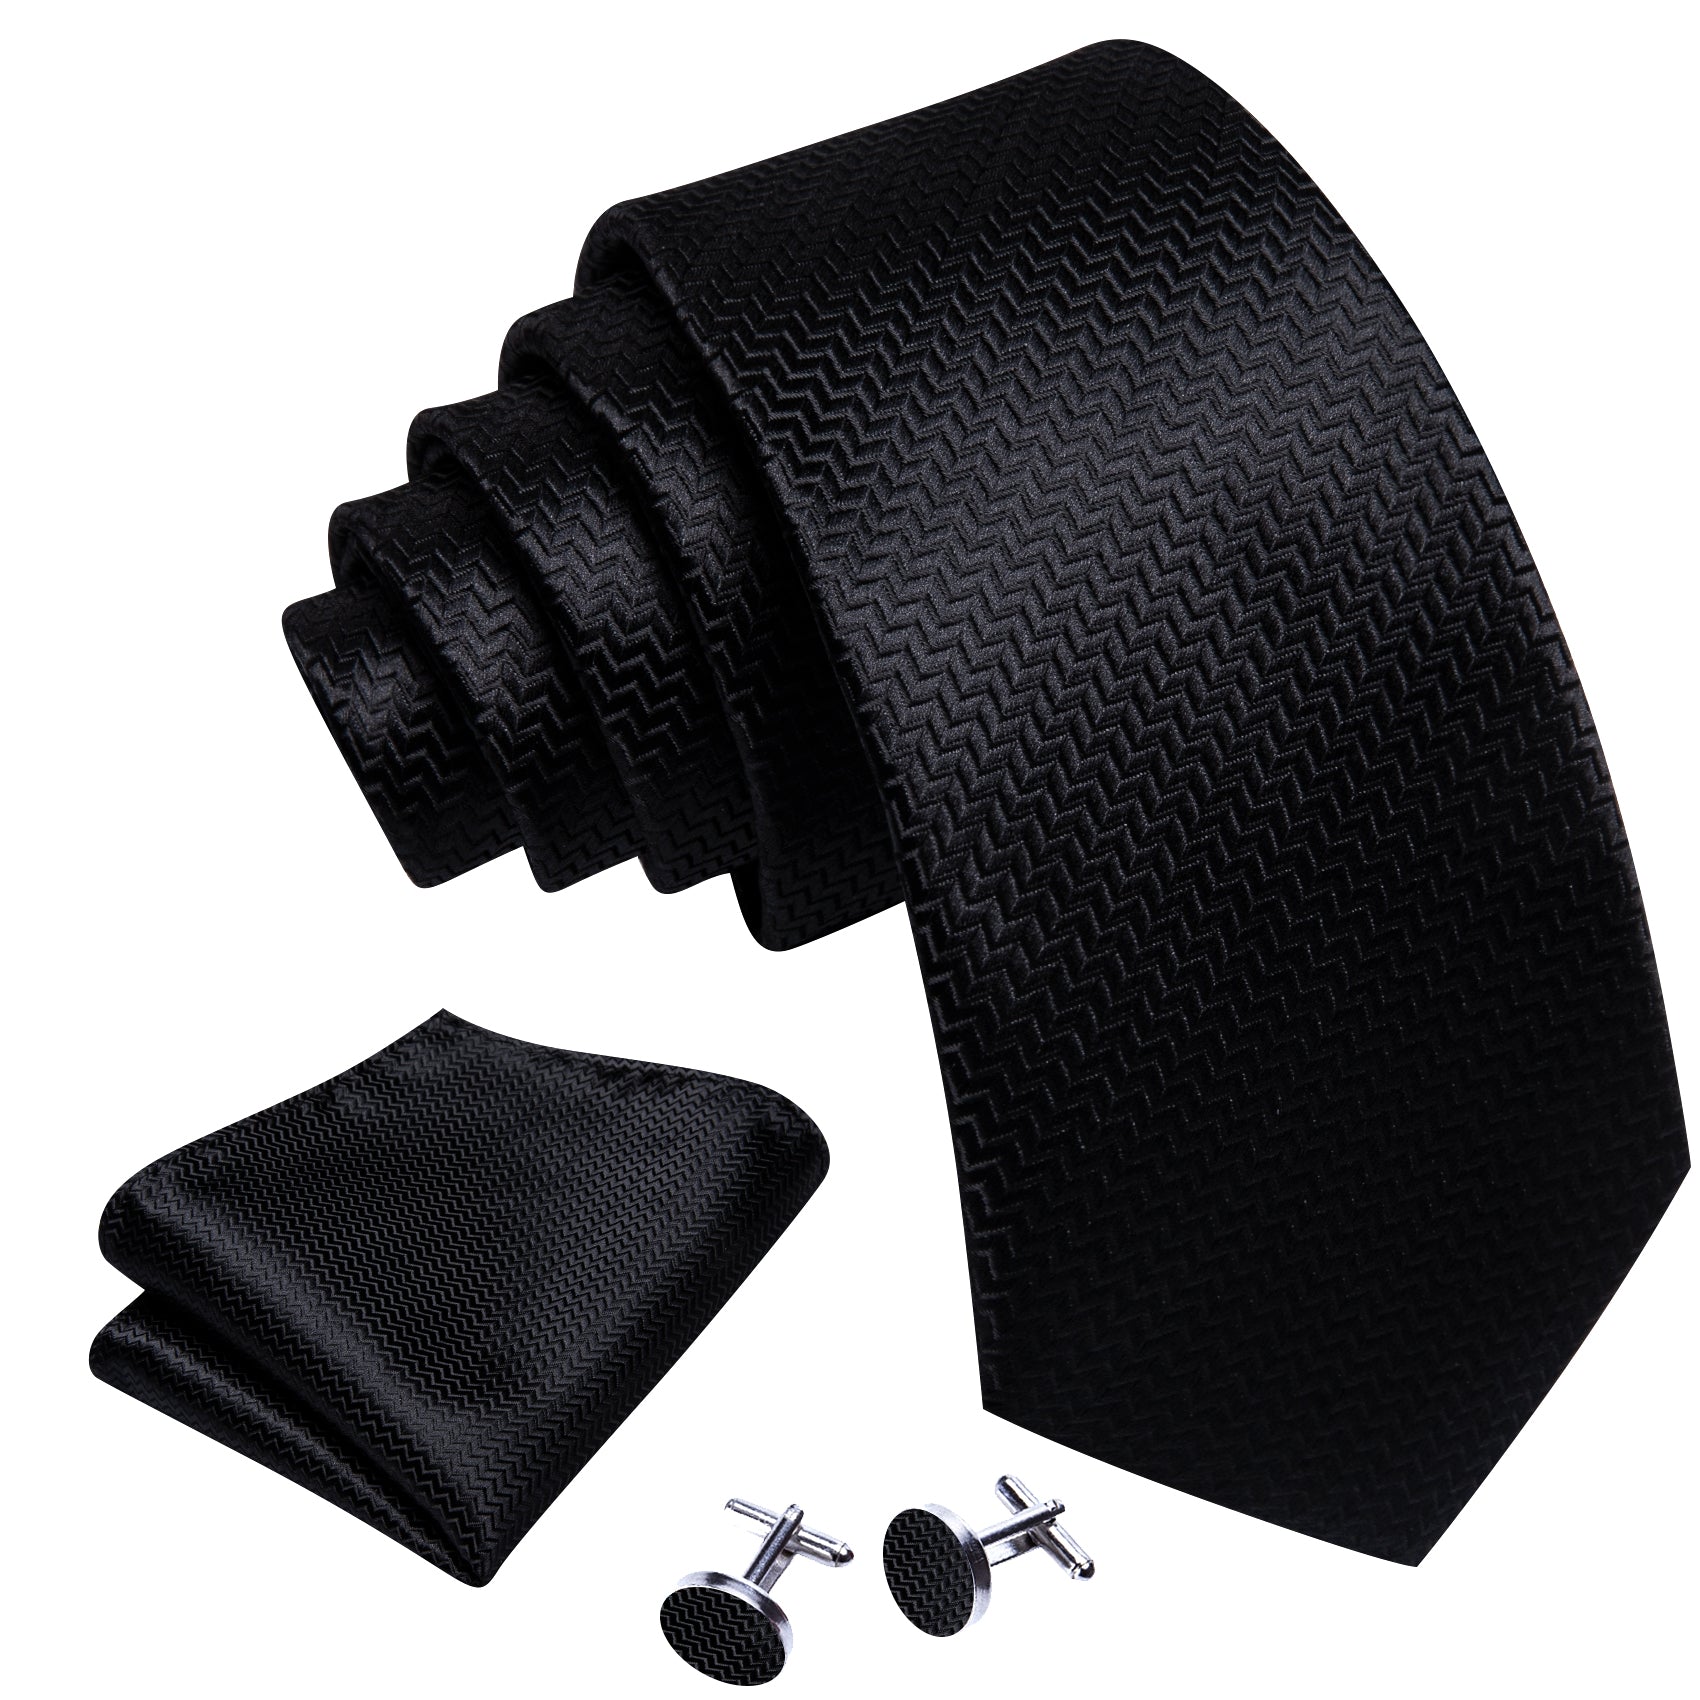 Barry.wang Extra Long Tie Black Solid Silk 63 Inches Men's Tie Pocket Square Cufflinks Set